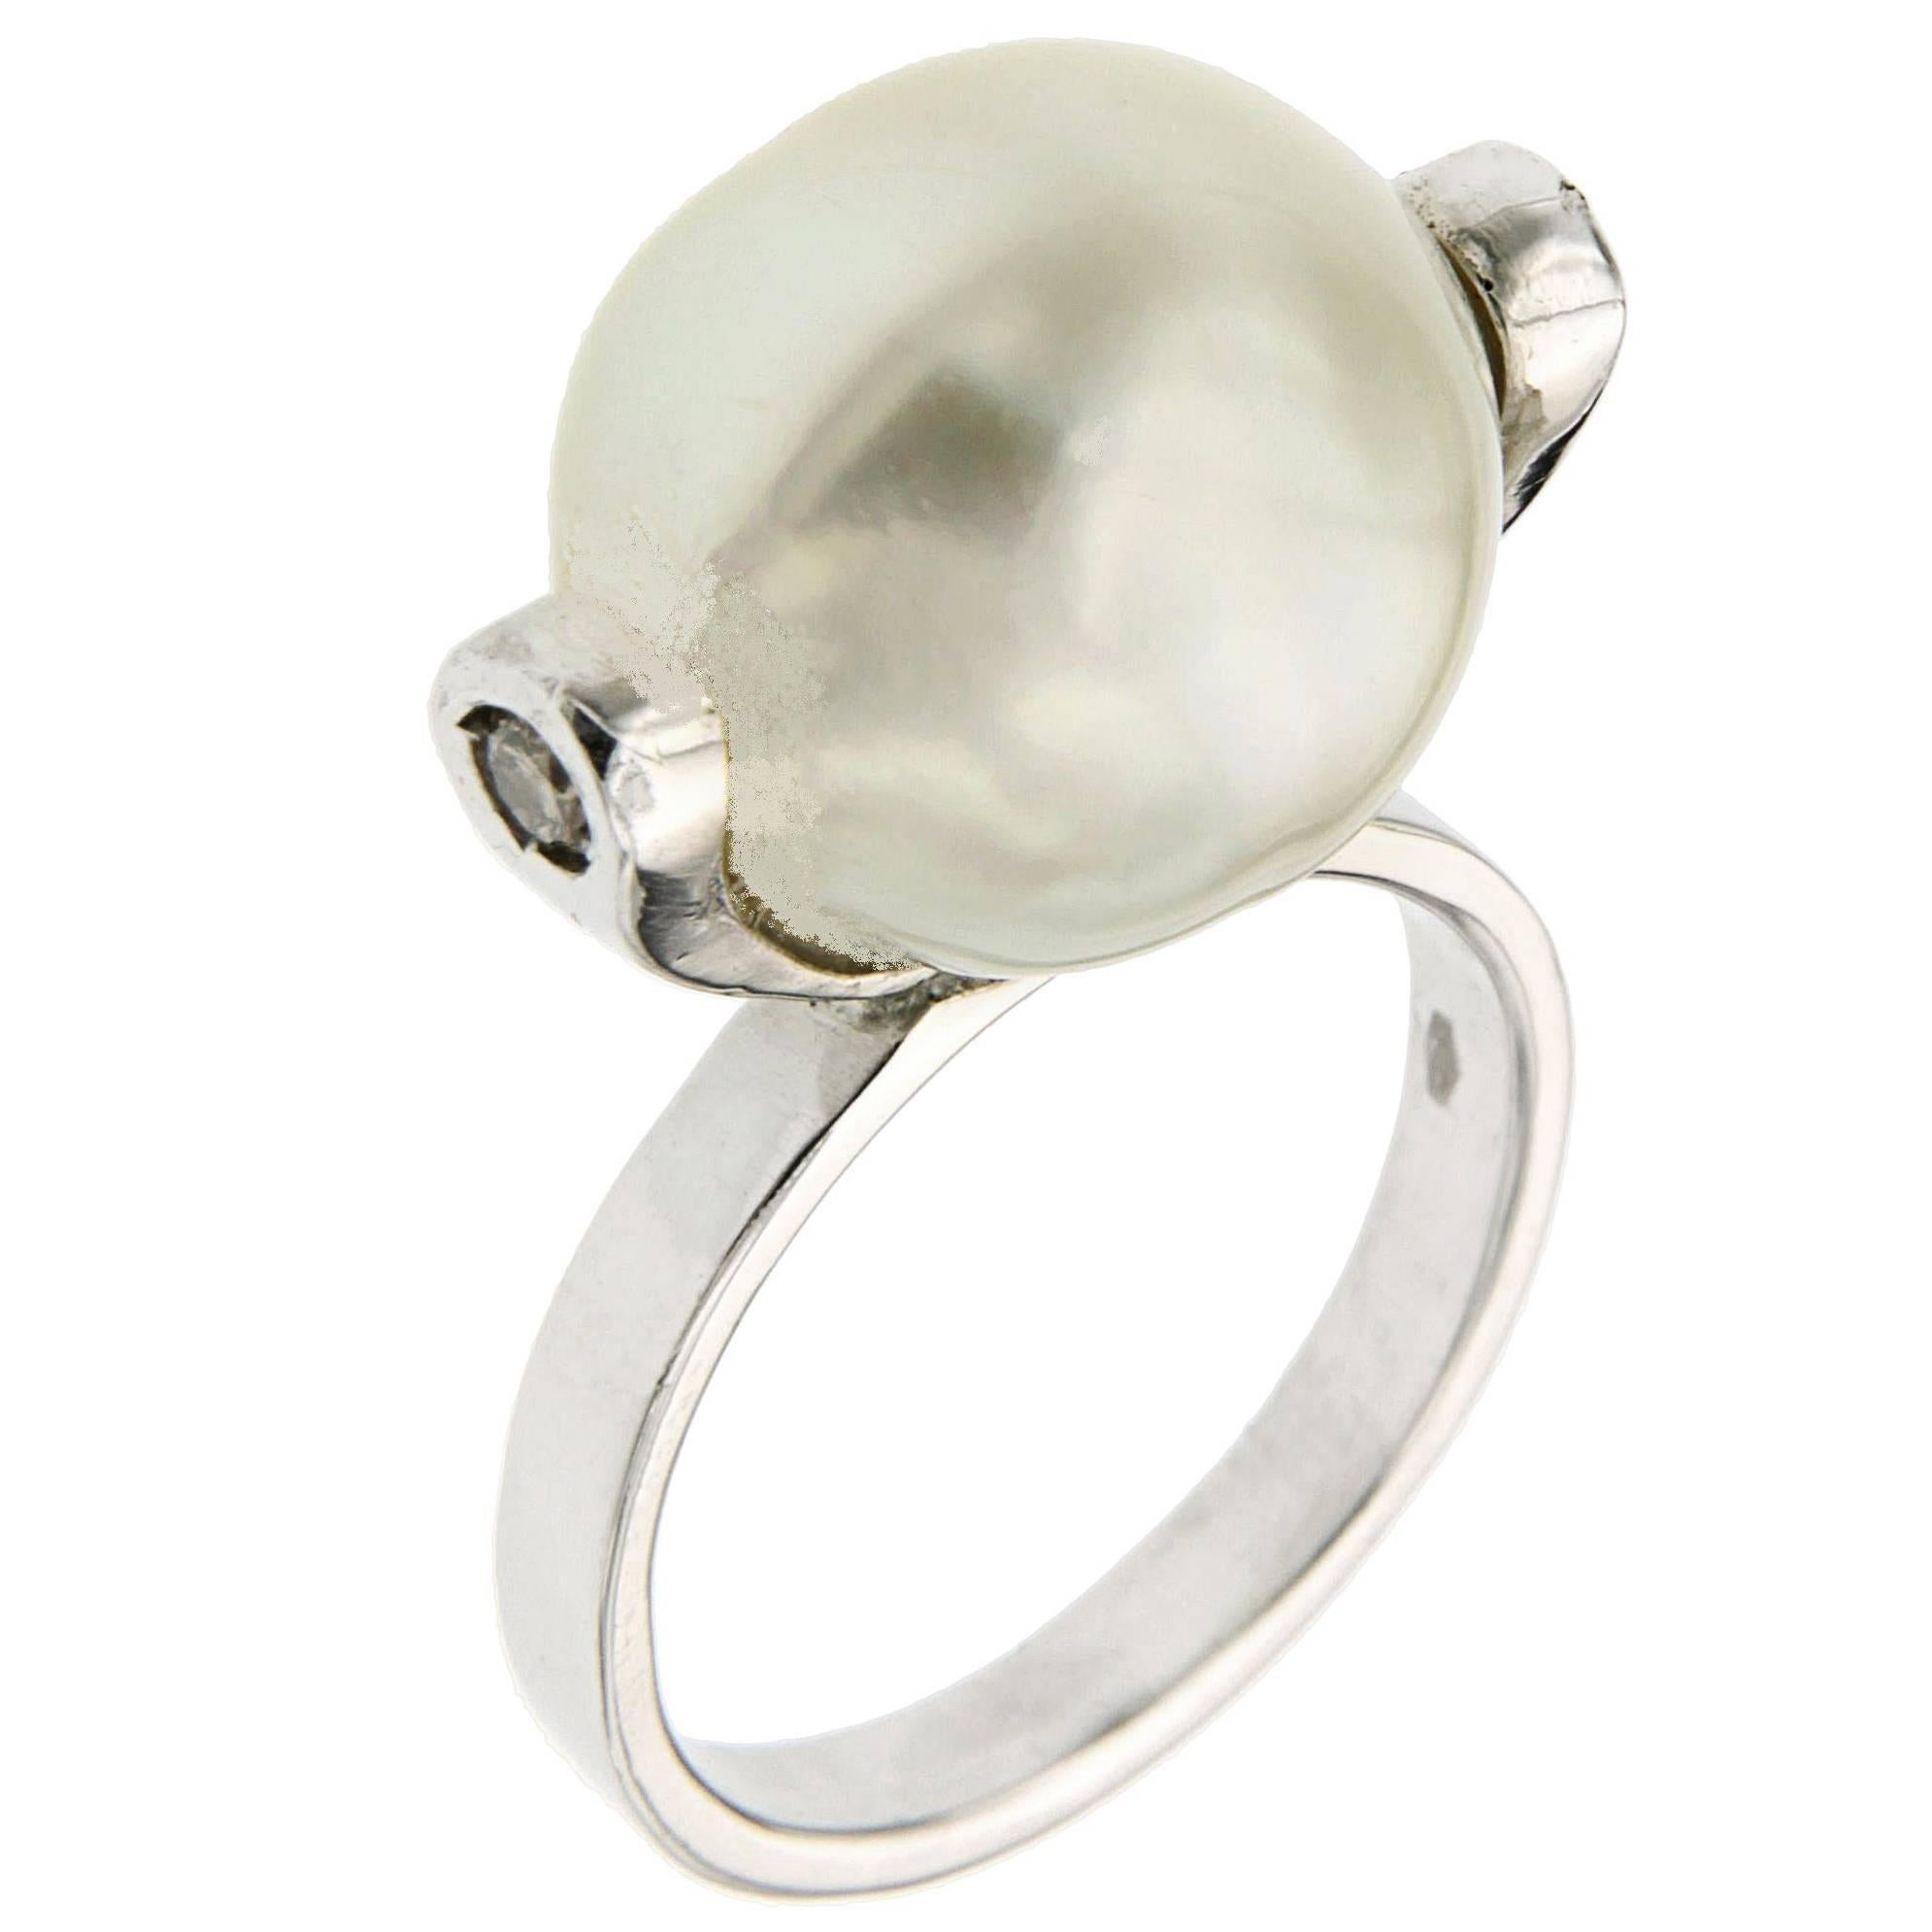 Australian Pearl Diamonds White Gold Ring Handcrafted In Italy By Botta Gioielli For Sale